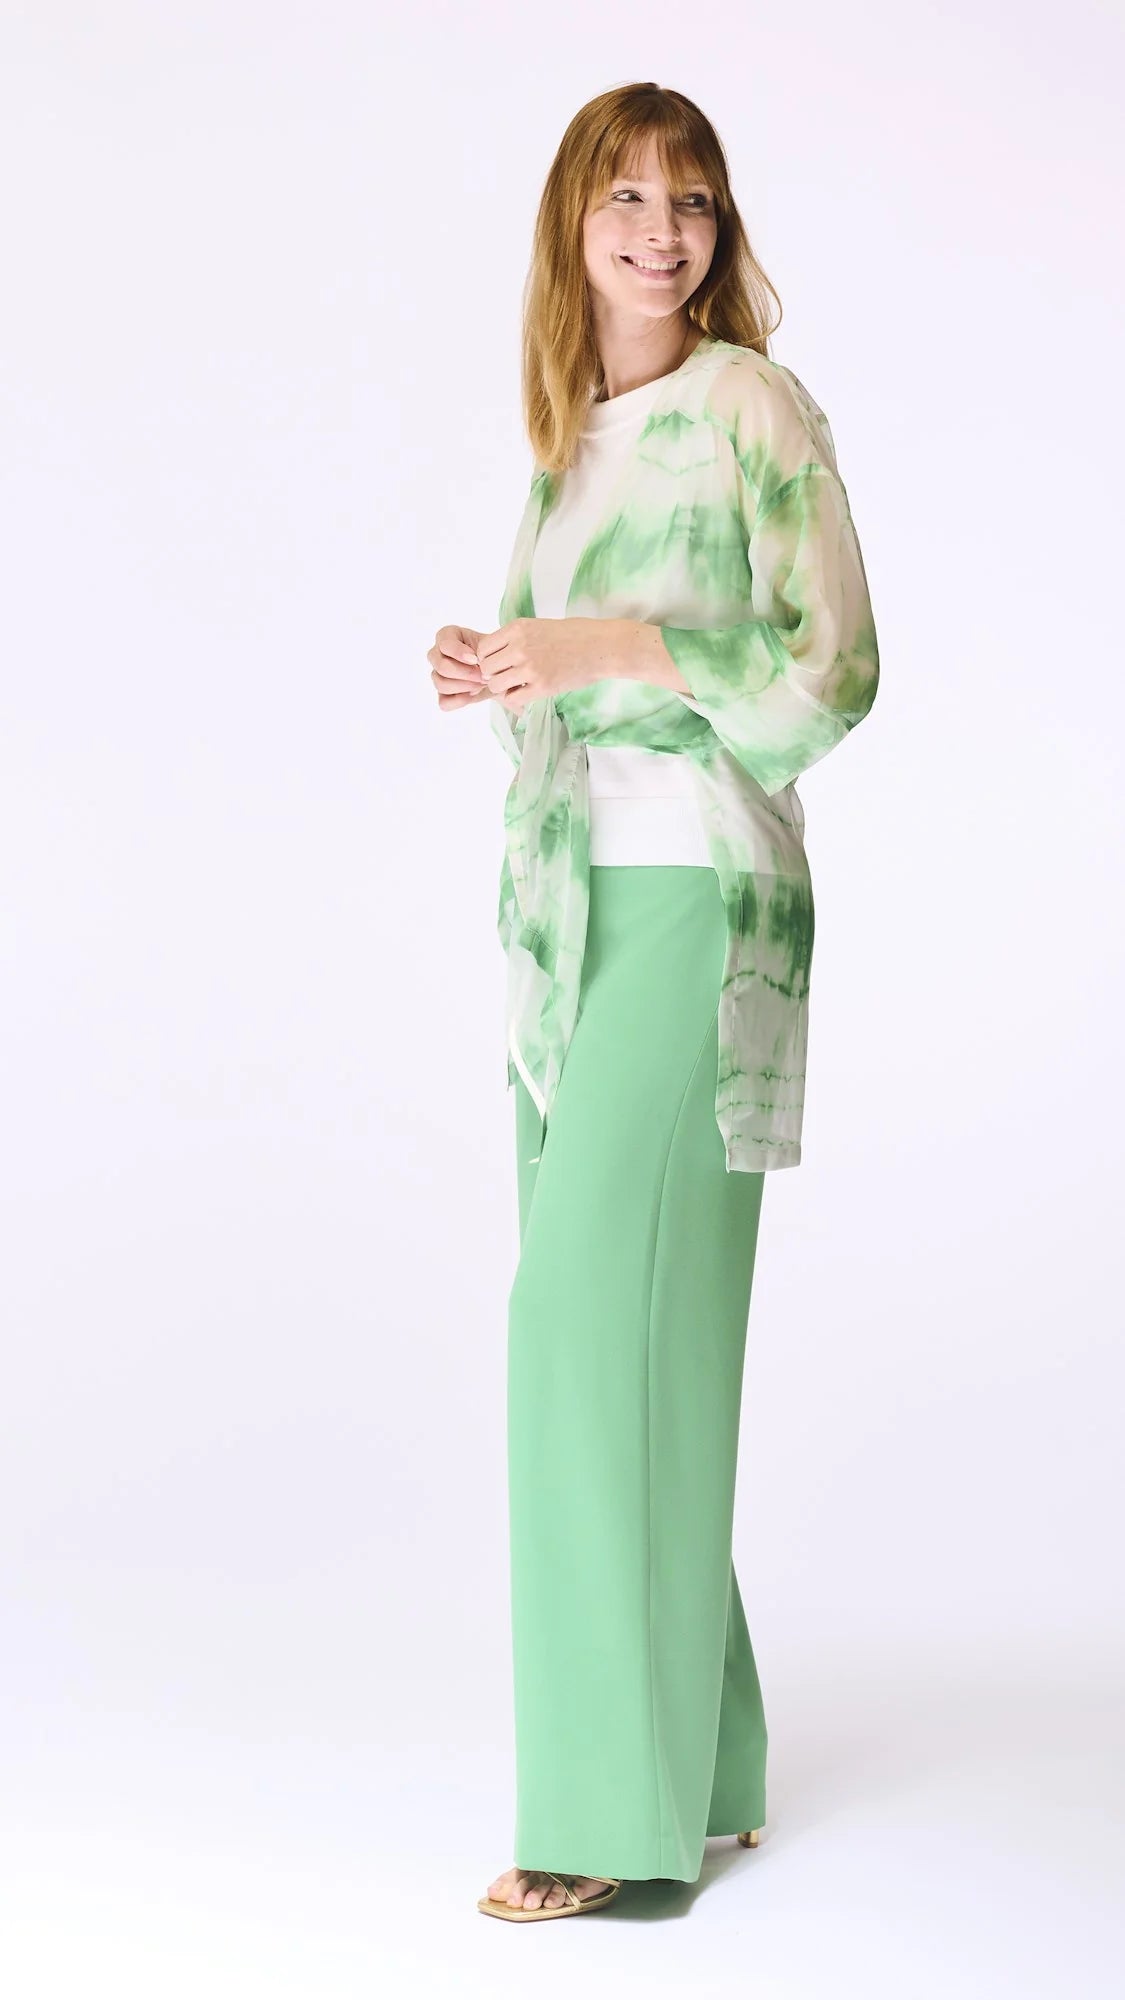 Bloes Groen Accent Fashion ( Studio 6176/Spring )